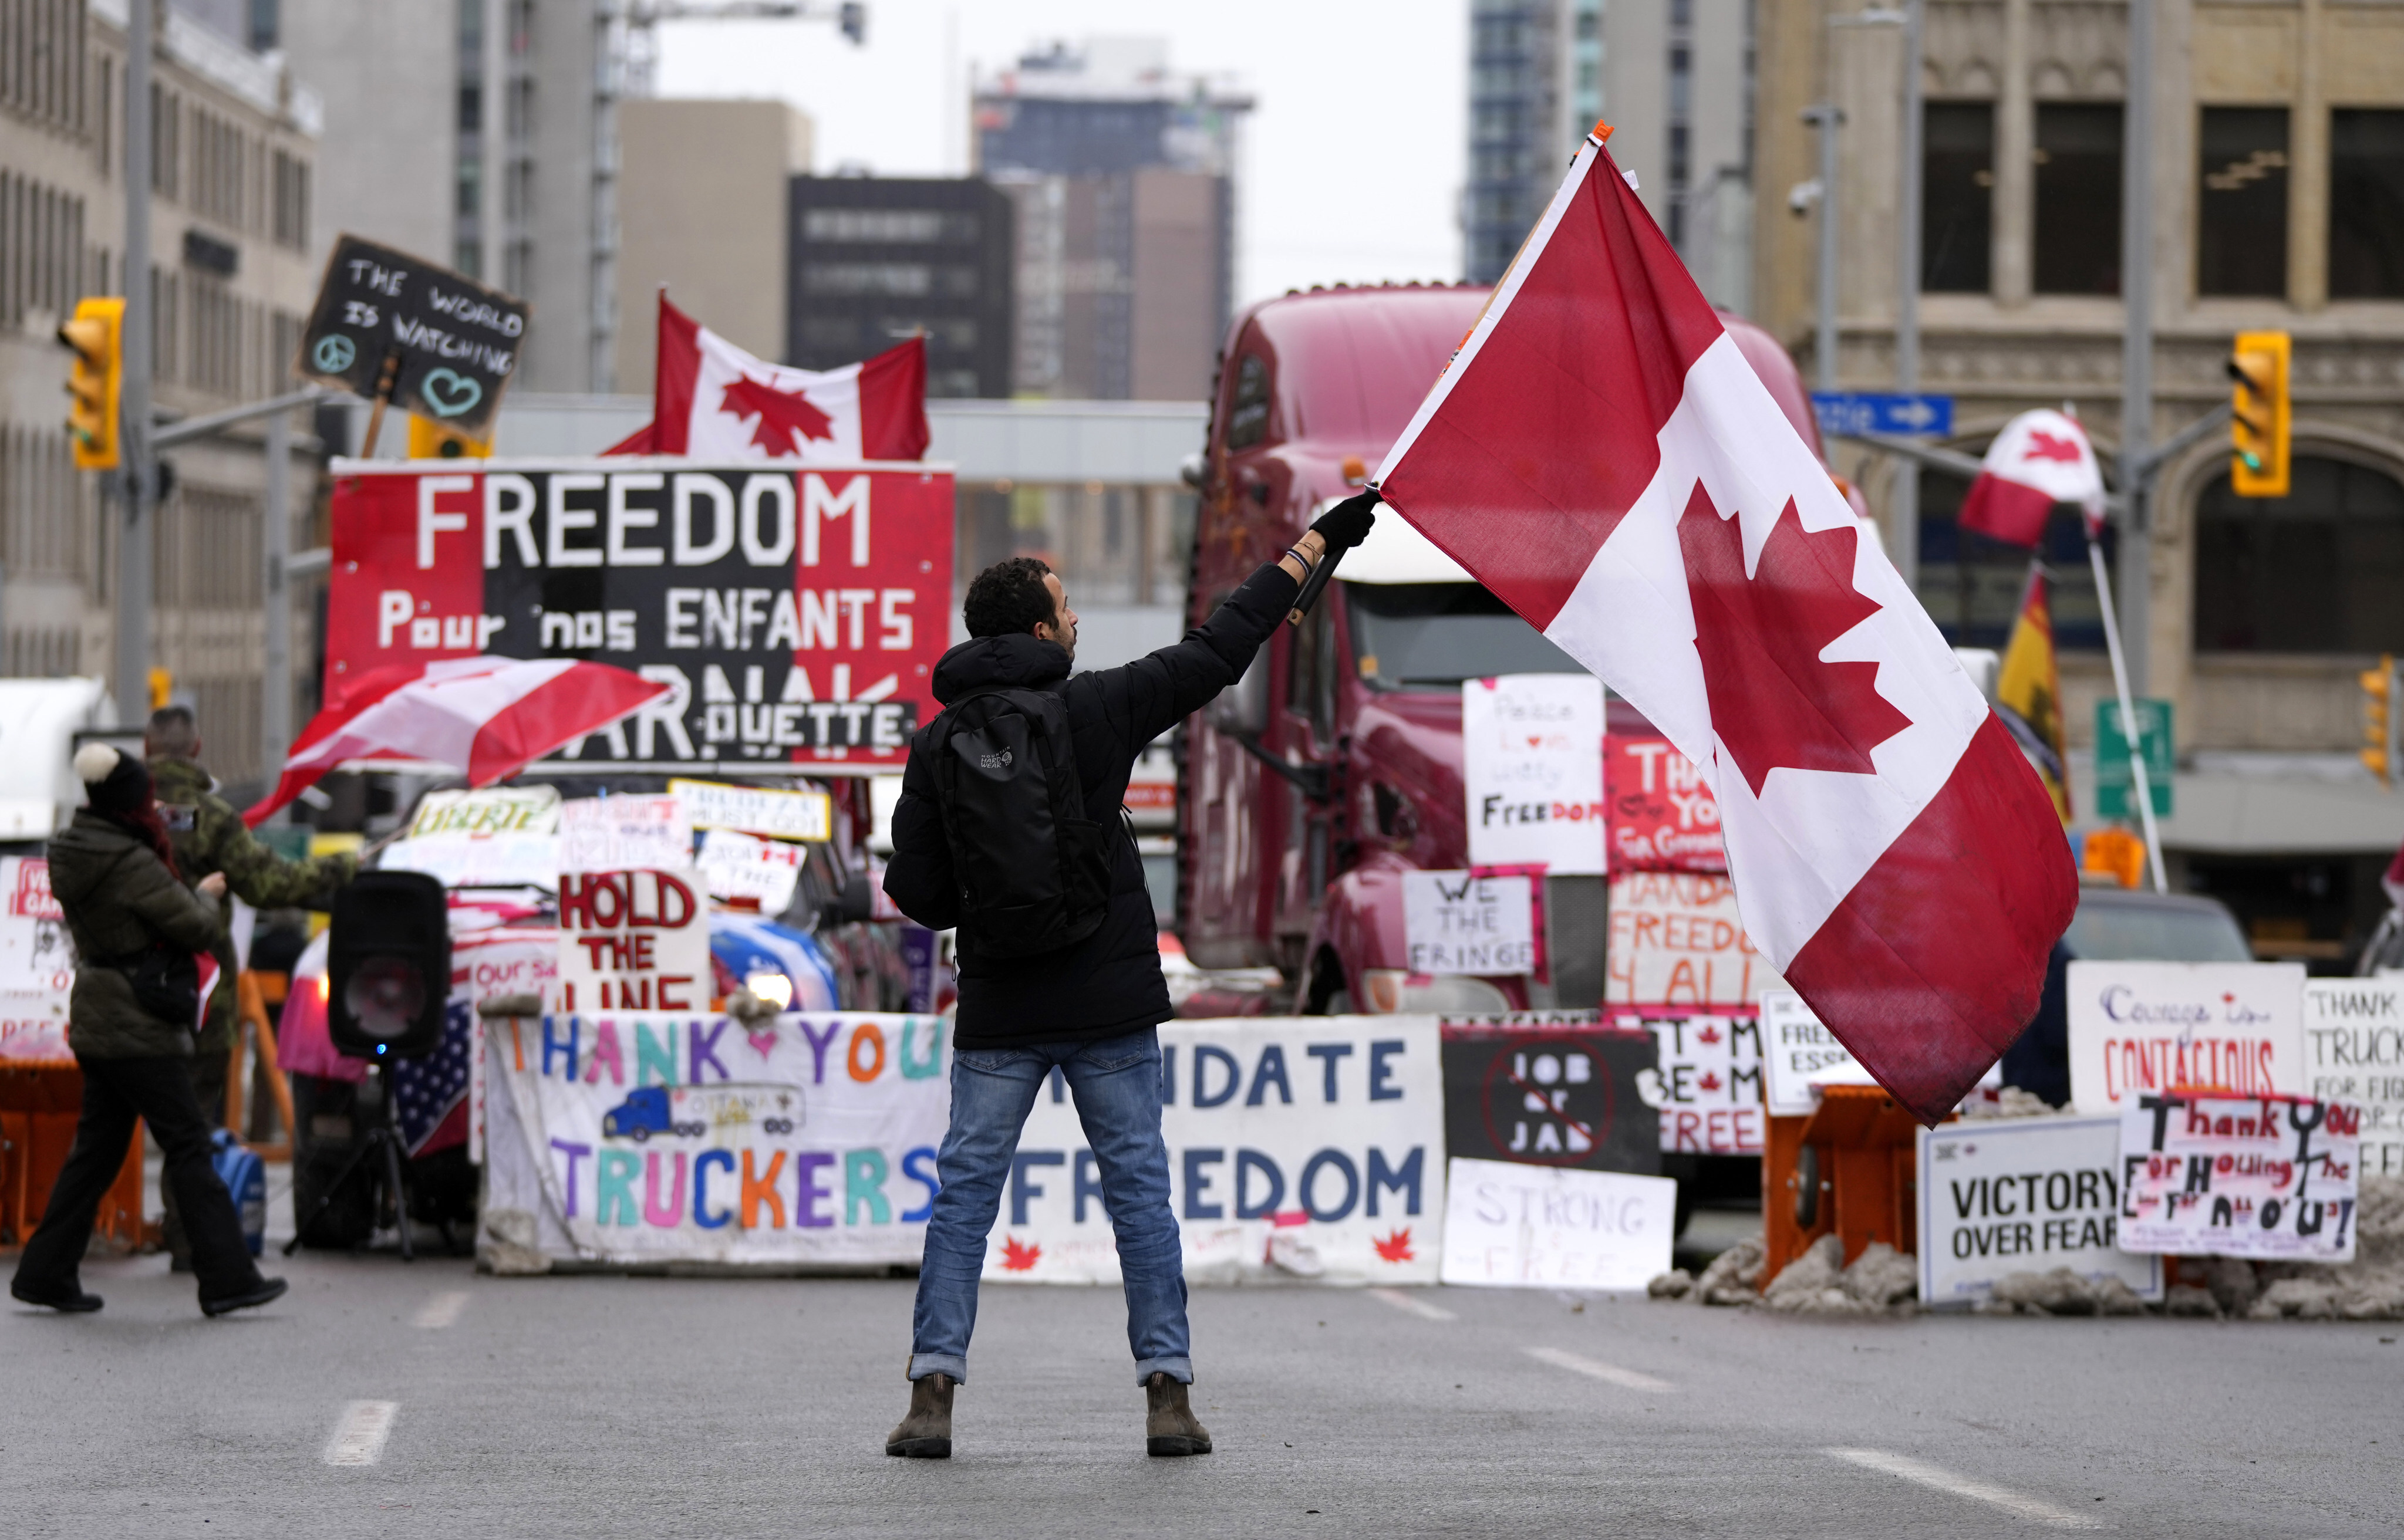 A protester waves a Canadian flag in front of parked vehicles in Ottawa on Friday. Photo: The Canadian Press via AP